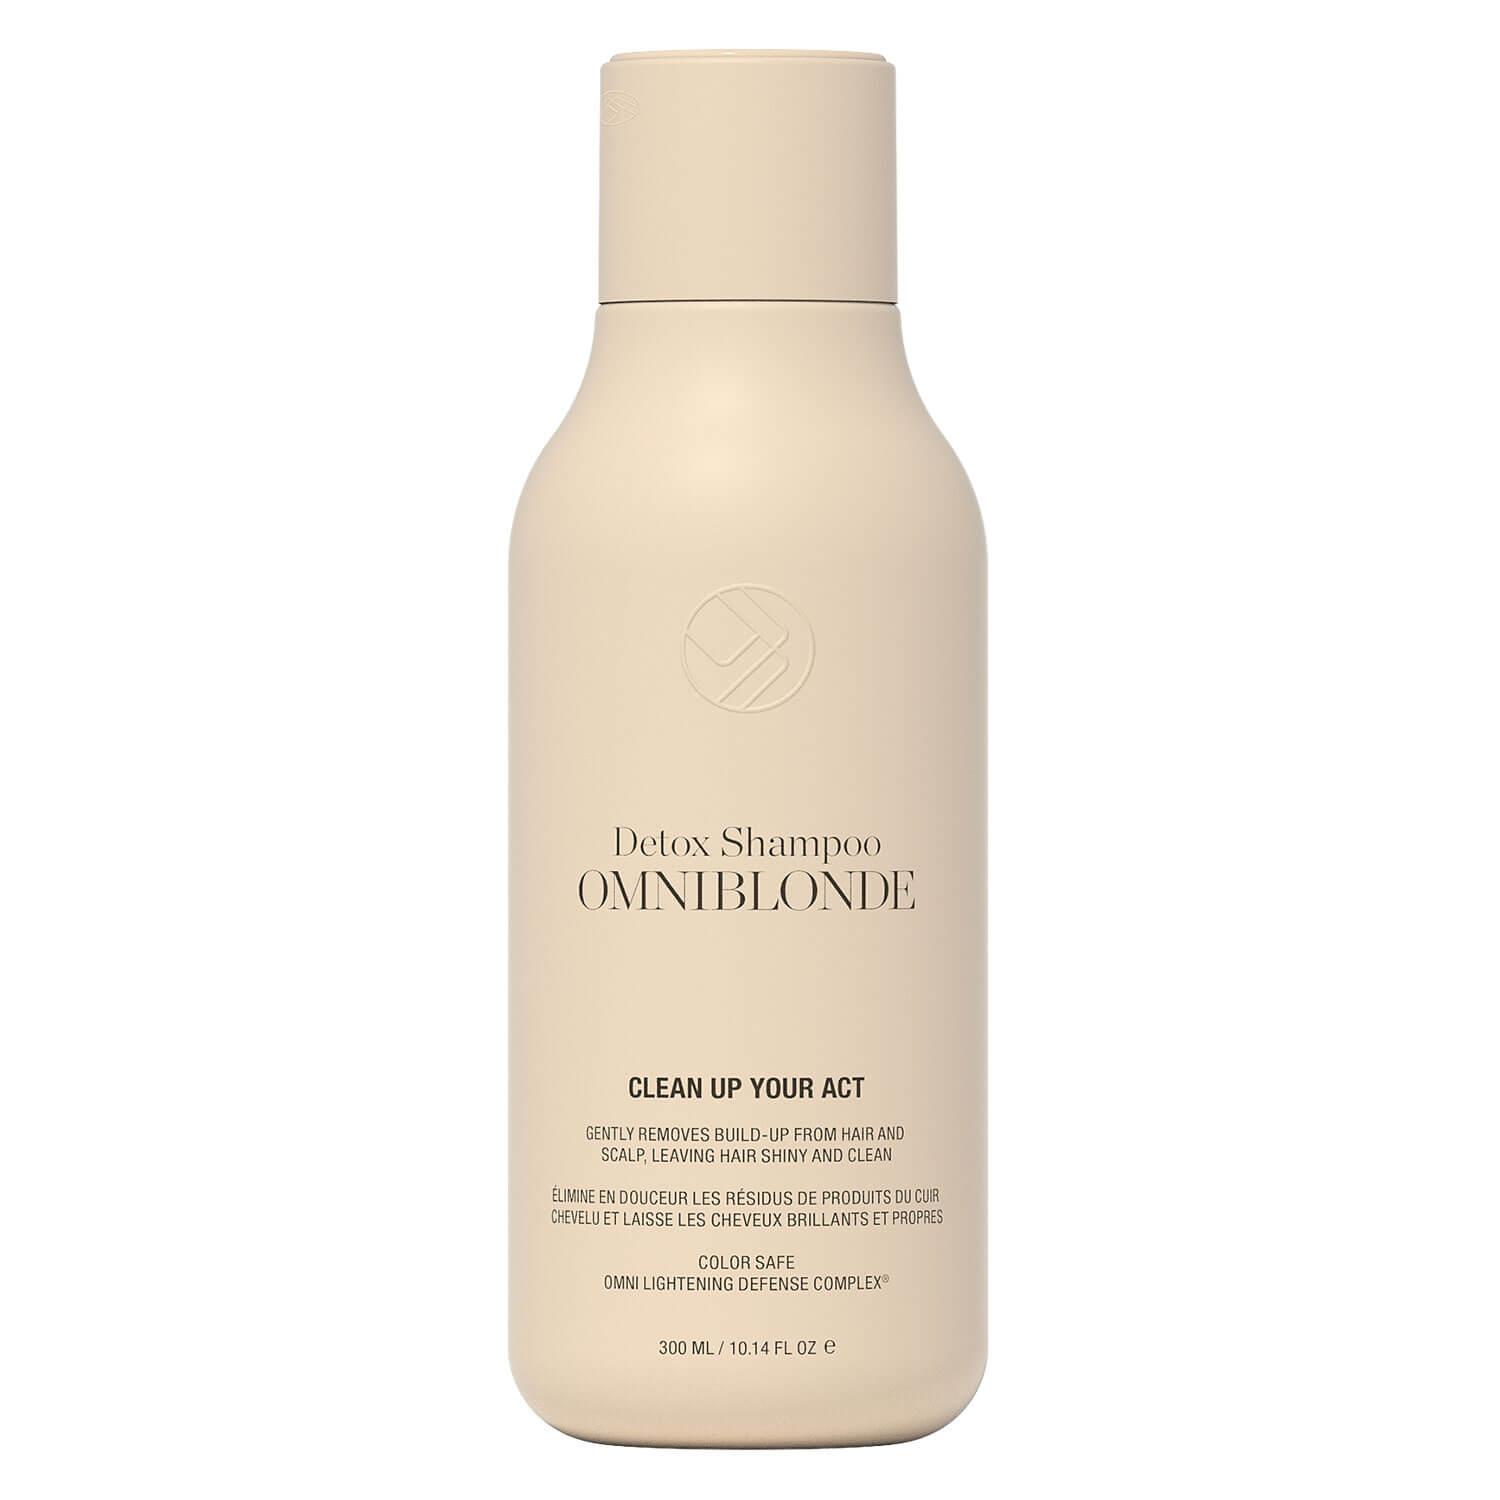 Omniblonde - Clean Up Your Act Detox Shampoo